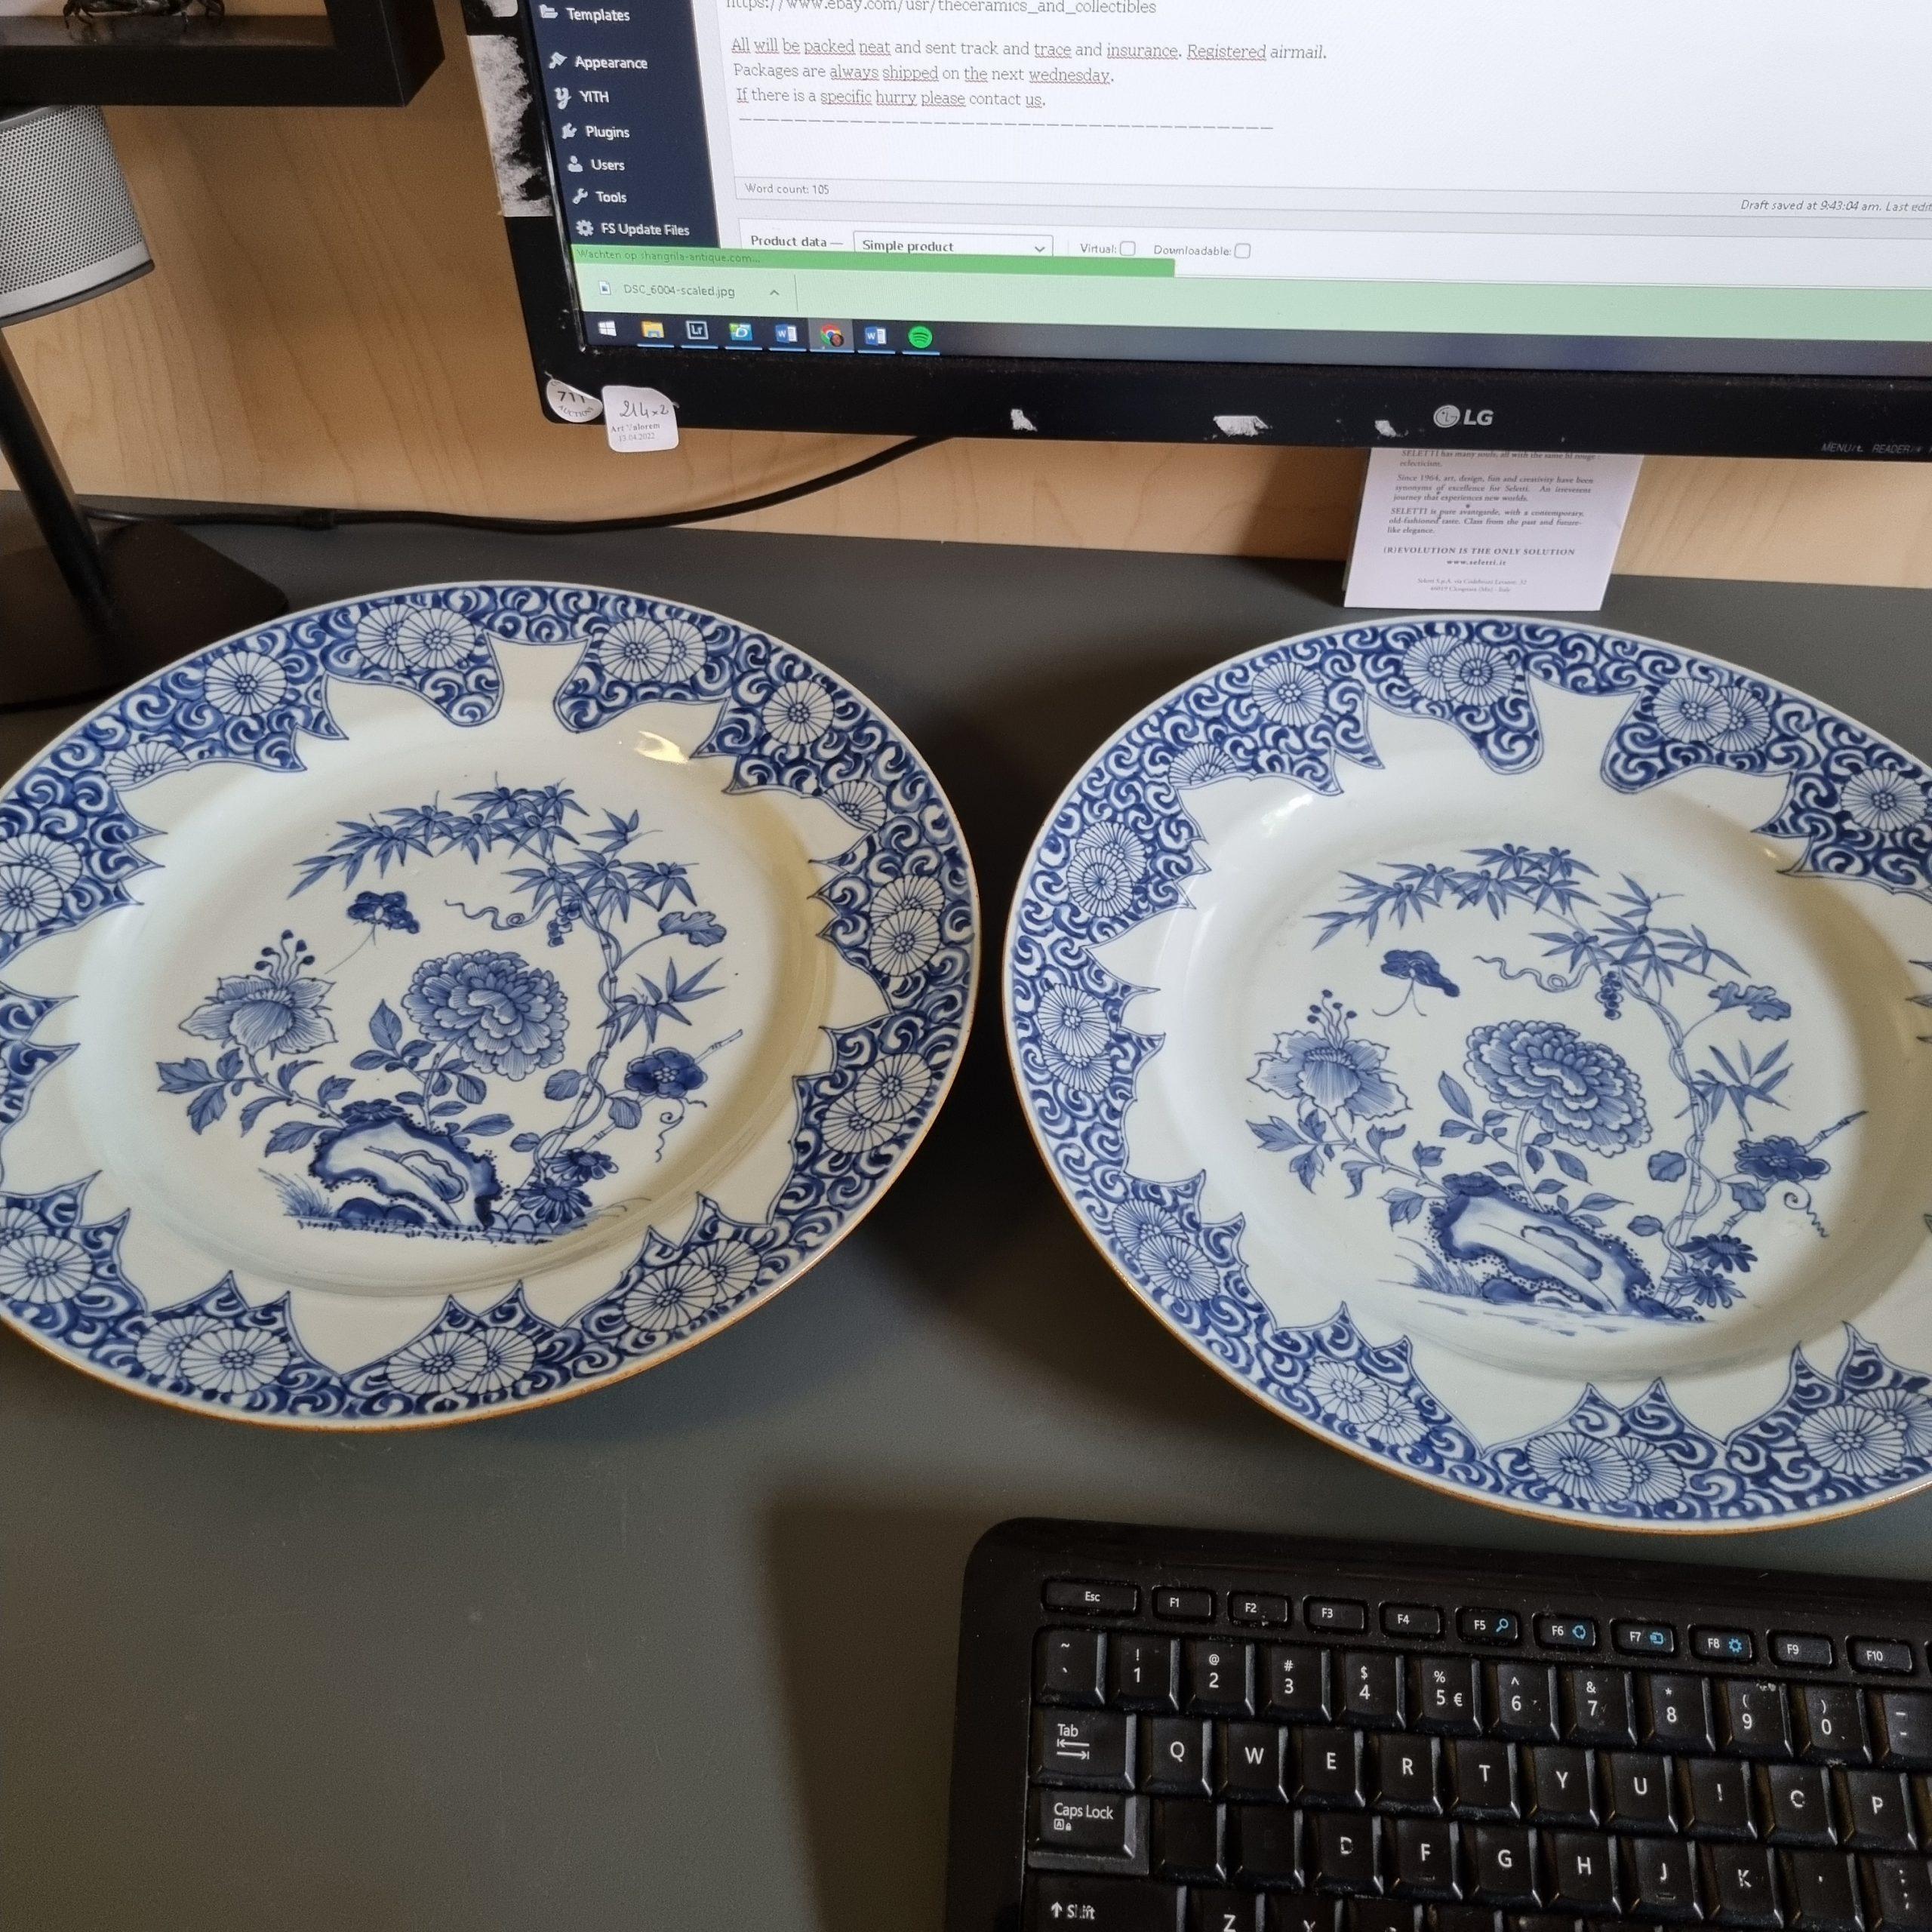 Description

Faboulas quality chargers of large size. Very nice decoration of white area in the shape of a leaf with a garden scene inside. The border with flowers and flower scrolls.

Condition
Both dishes perfect. Size 353 x 45mm Diameter x